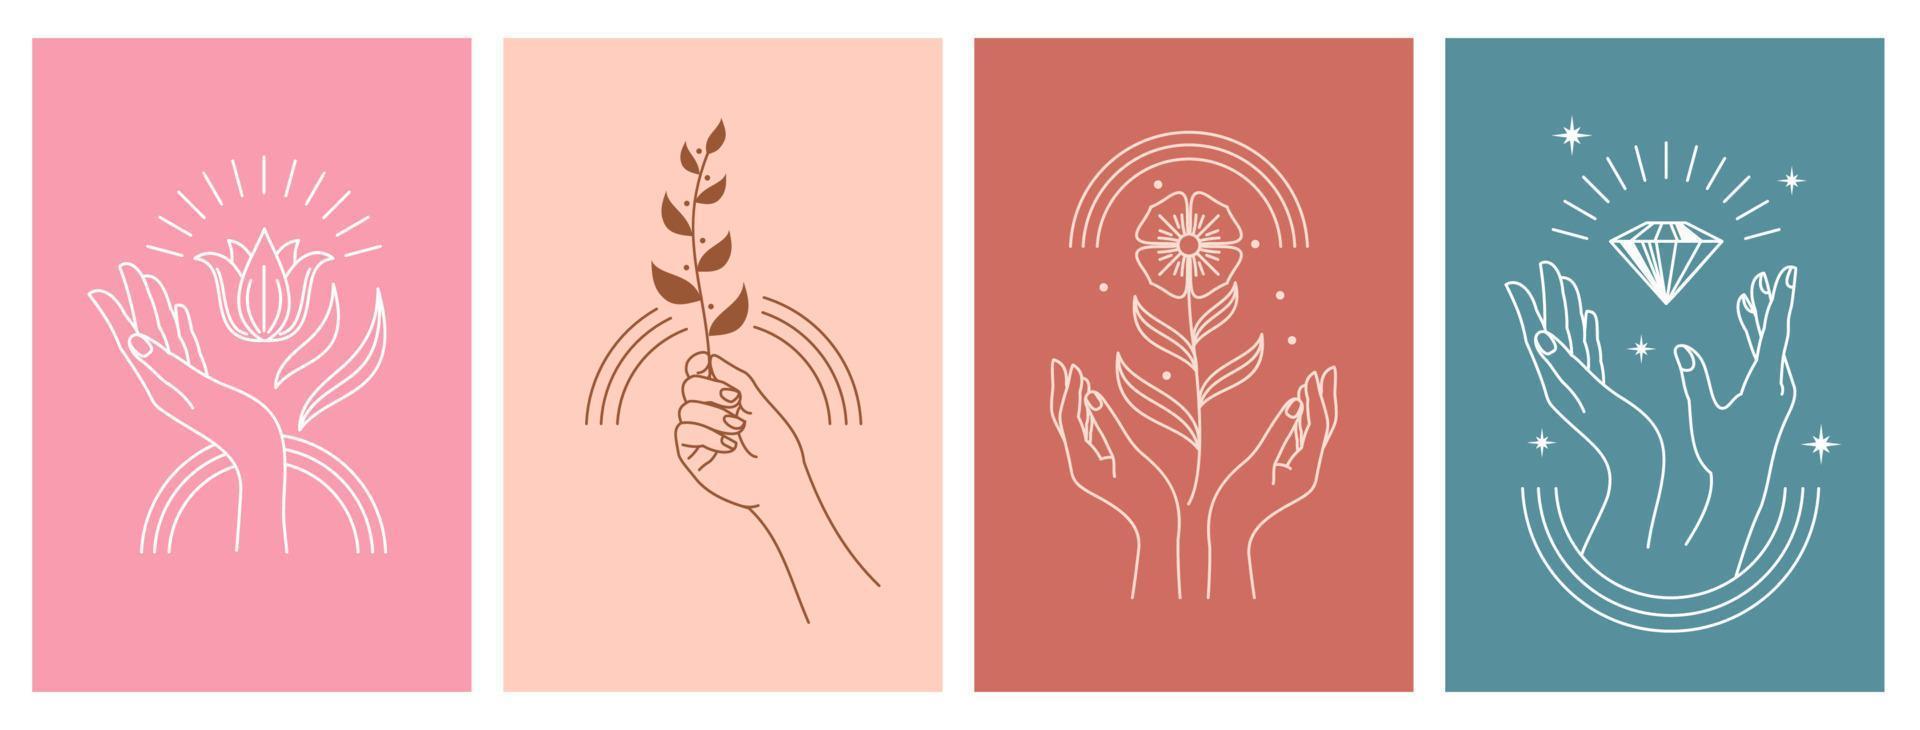 Cosmetic SPA icons, woman hands, sun, flower, gem vector